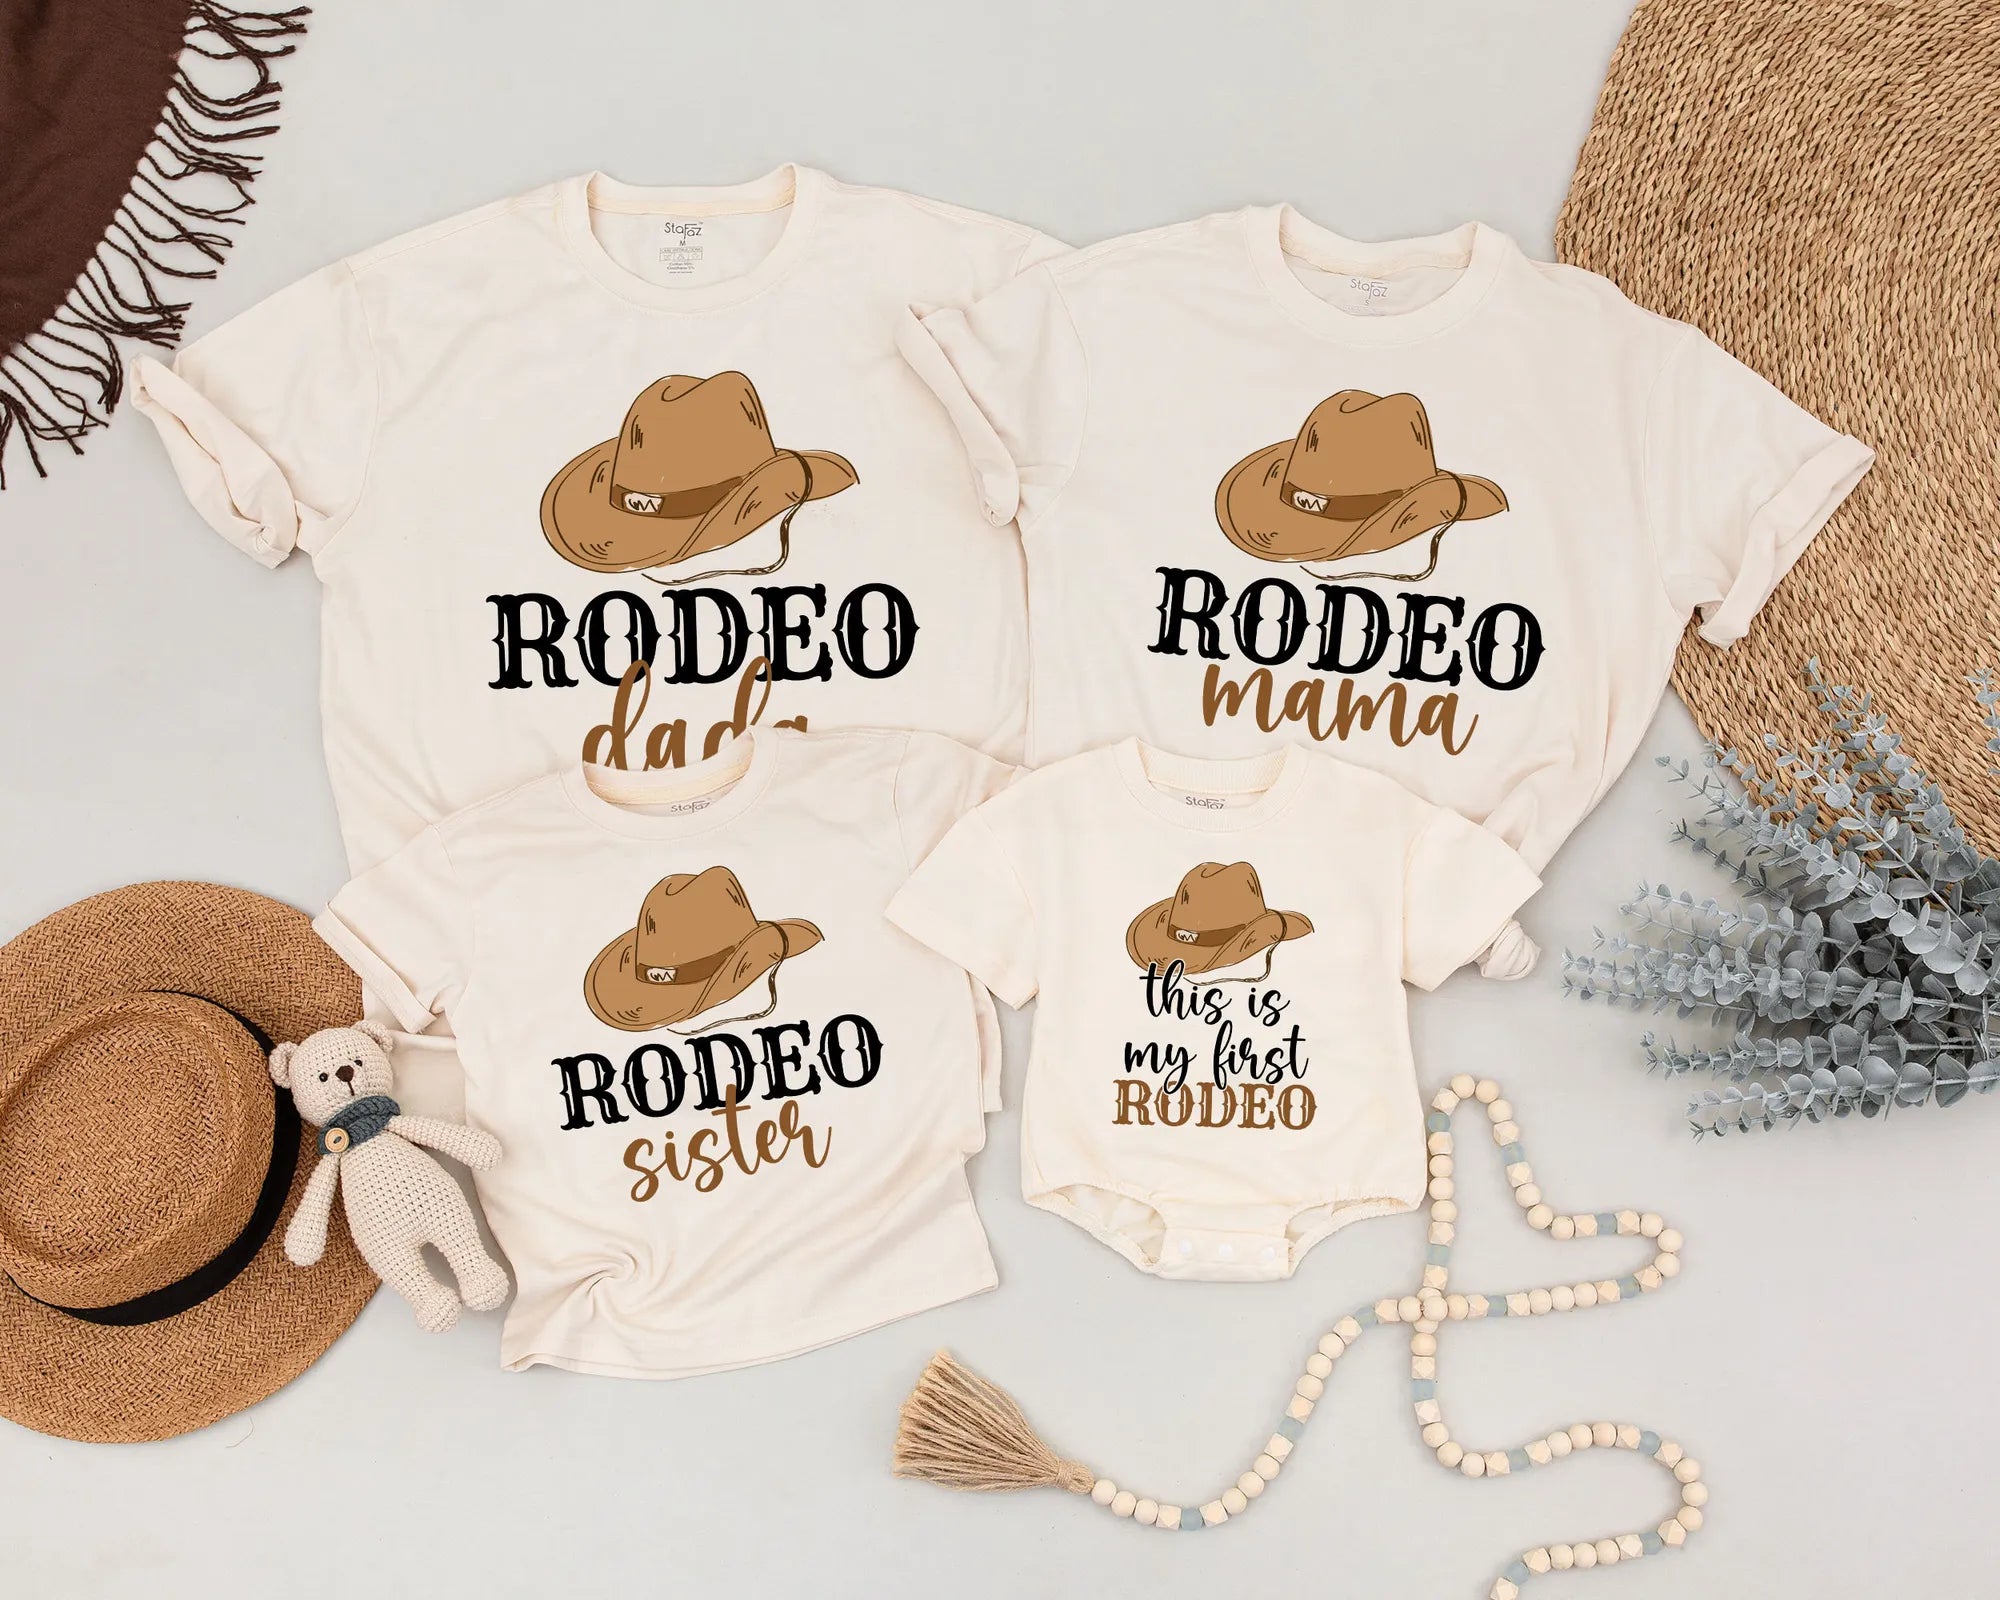 My First Rodeo Birthday Family T-Shirts: Cowboy Birthday Romper Gift!